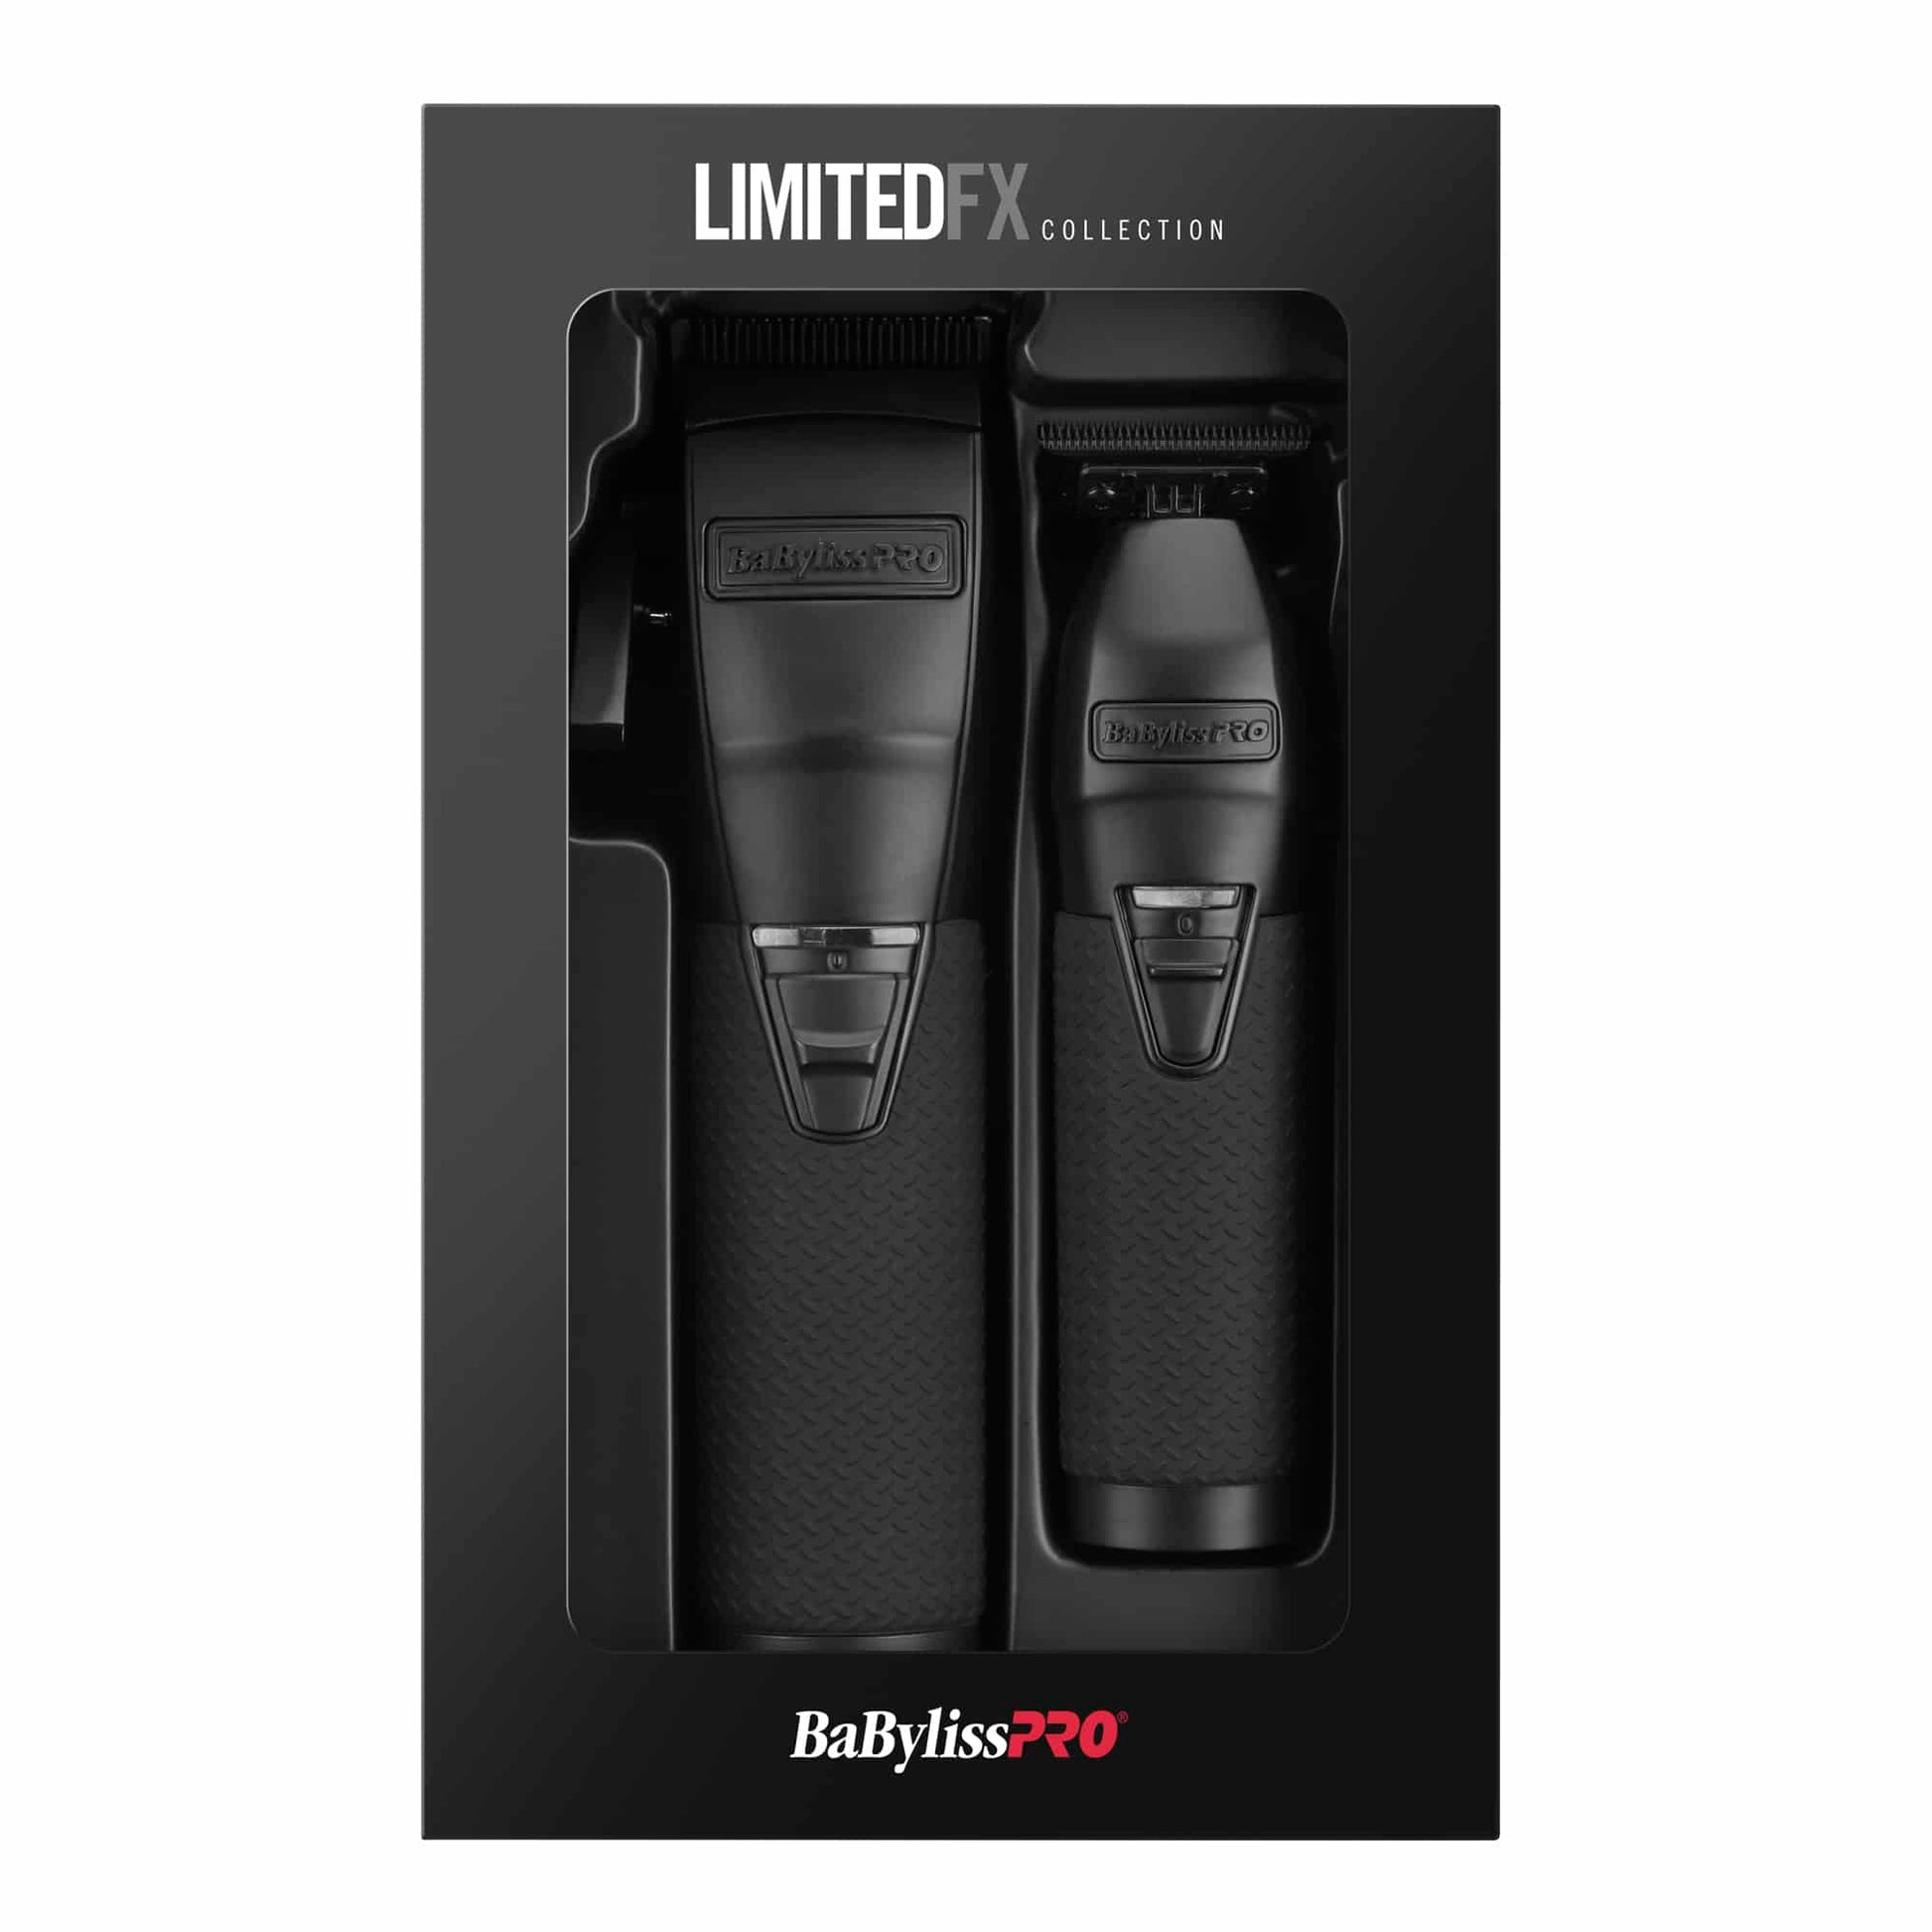 Babyliss Pro LimitedFX Clipper and Trimmer - Matte Black in Box